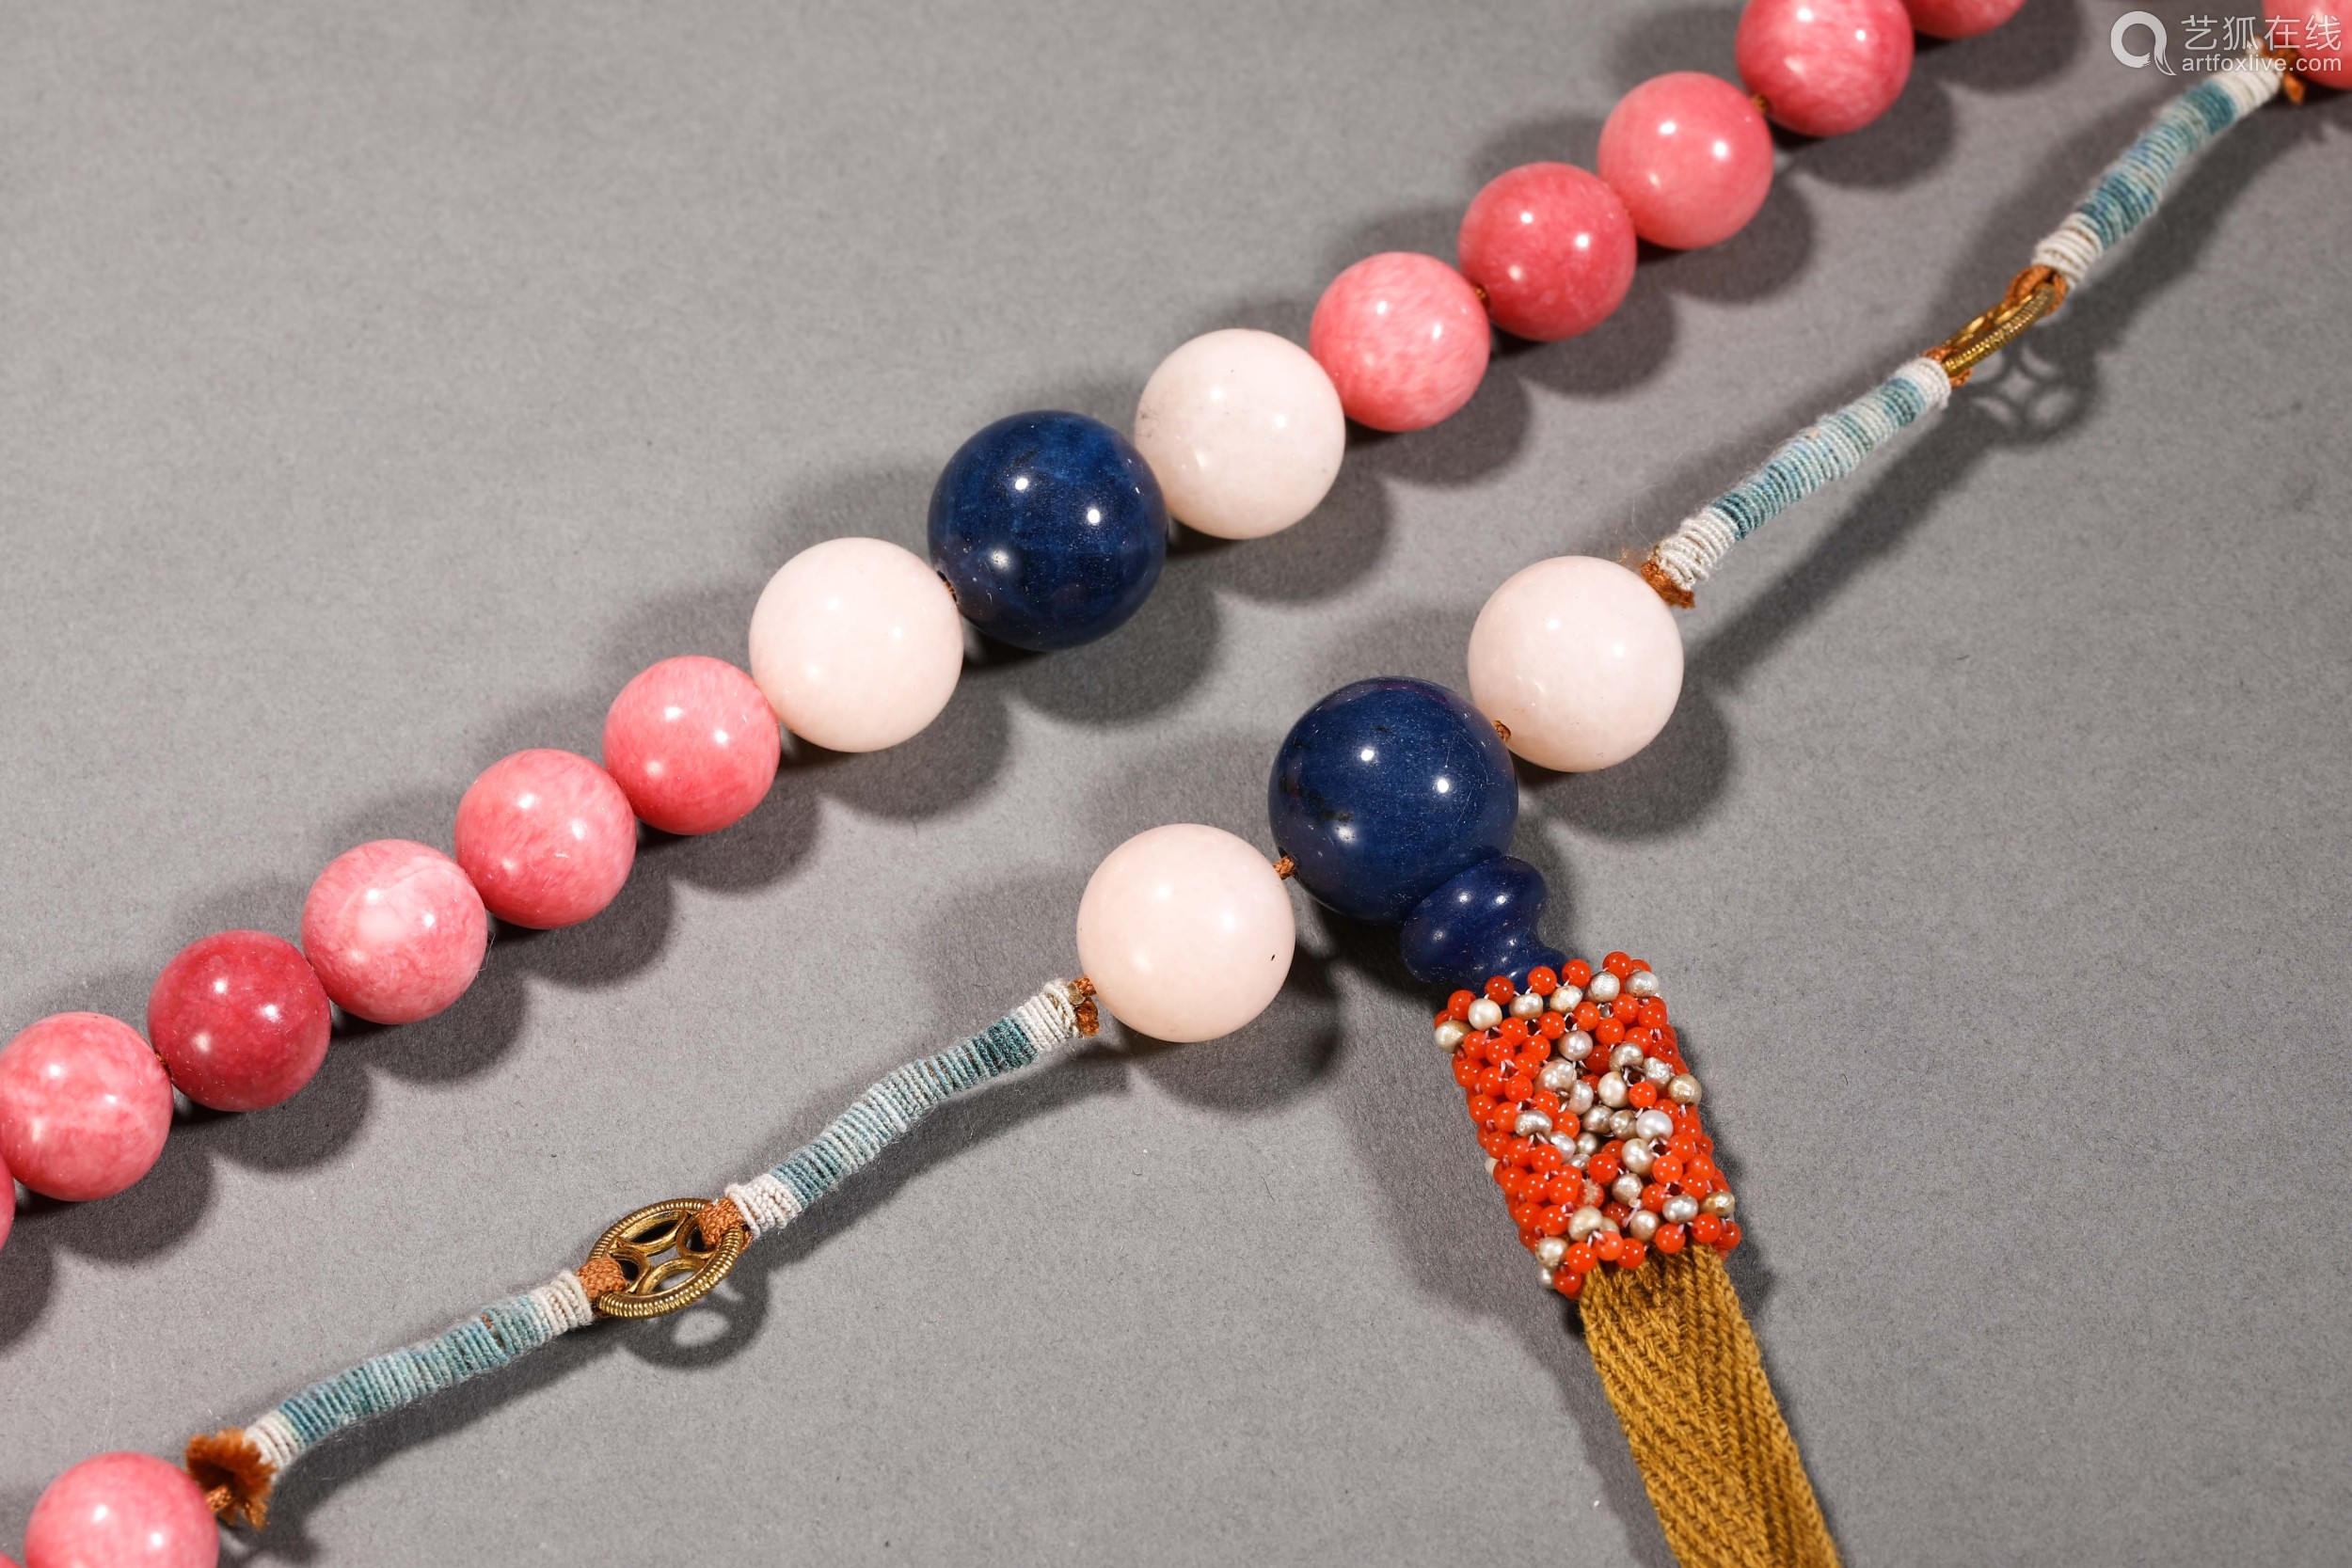 A set of court beads in the Qing Dynasty